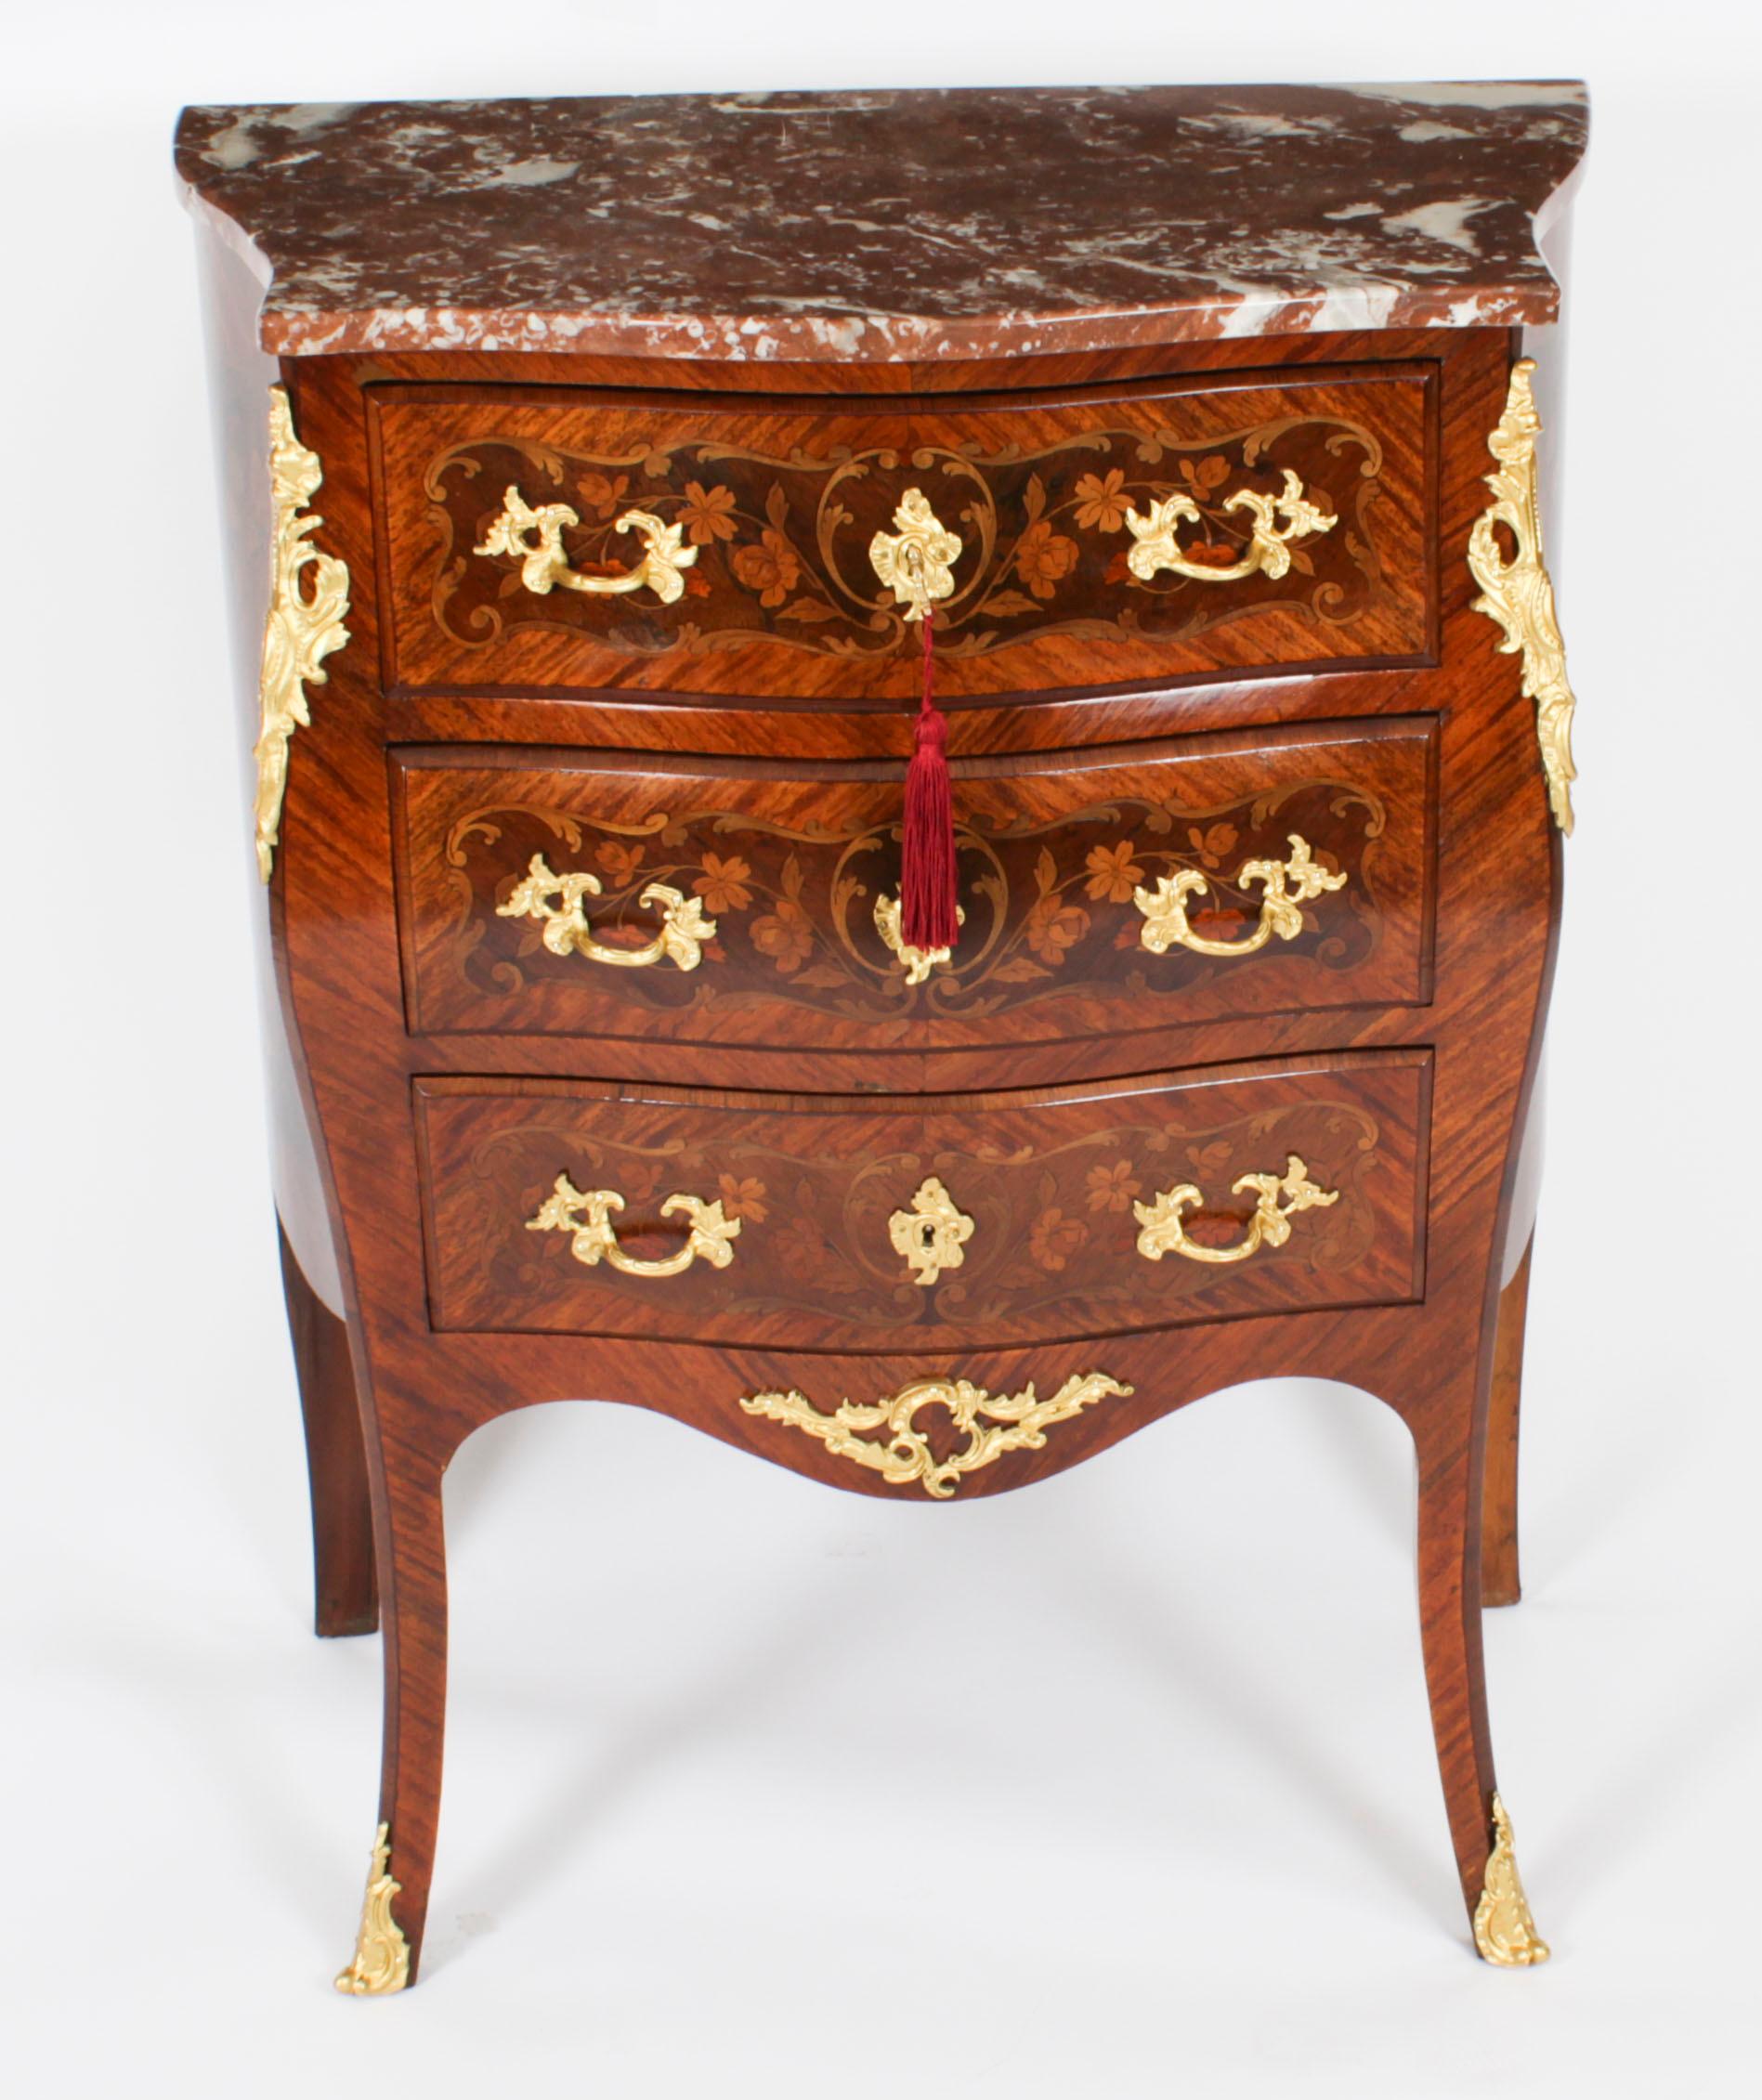 This is a stunning antique French walnut and marquetry Louis Revival bombe commode, circa 1880 in date. 
 
This gorgeous commode features a stunning shaped Rouge Griote marble top above three full width drawers for ample storage, and was inspired by